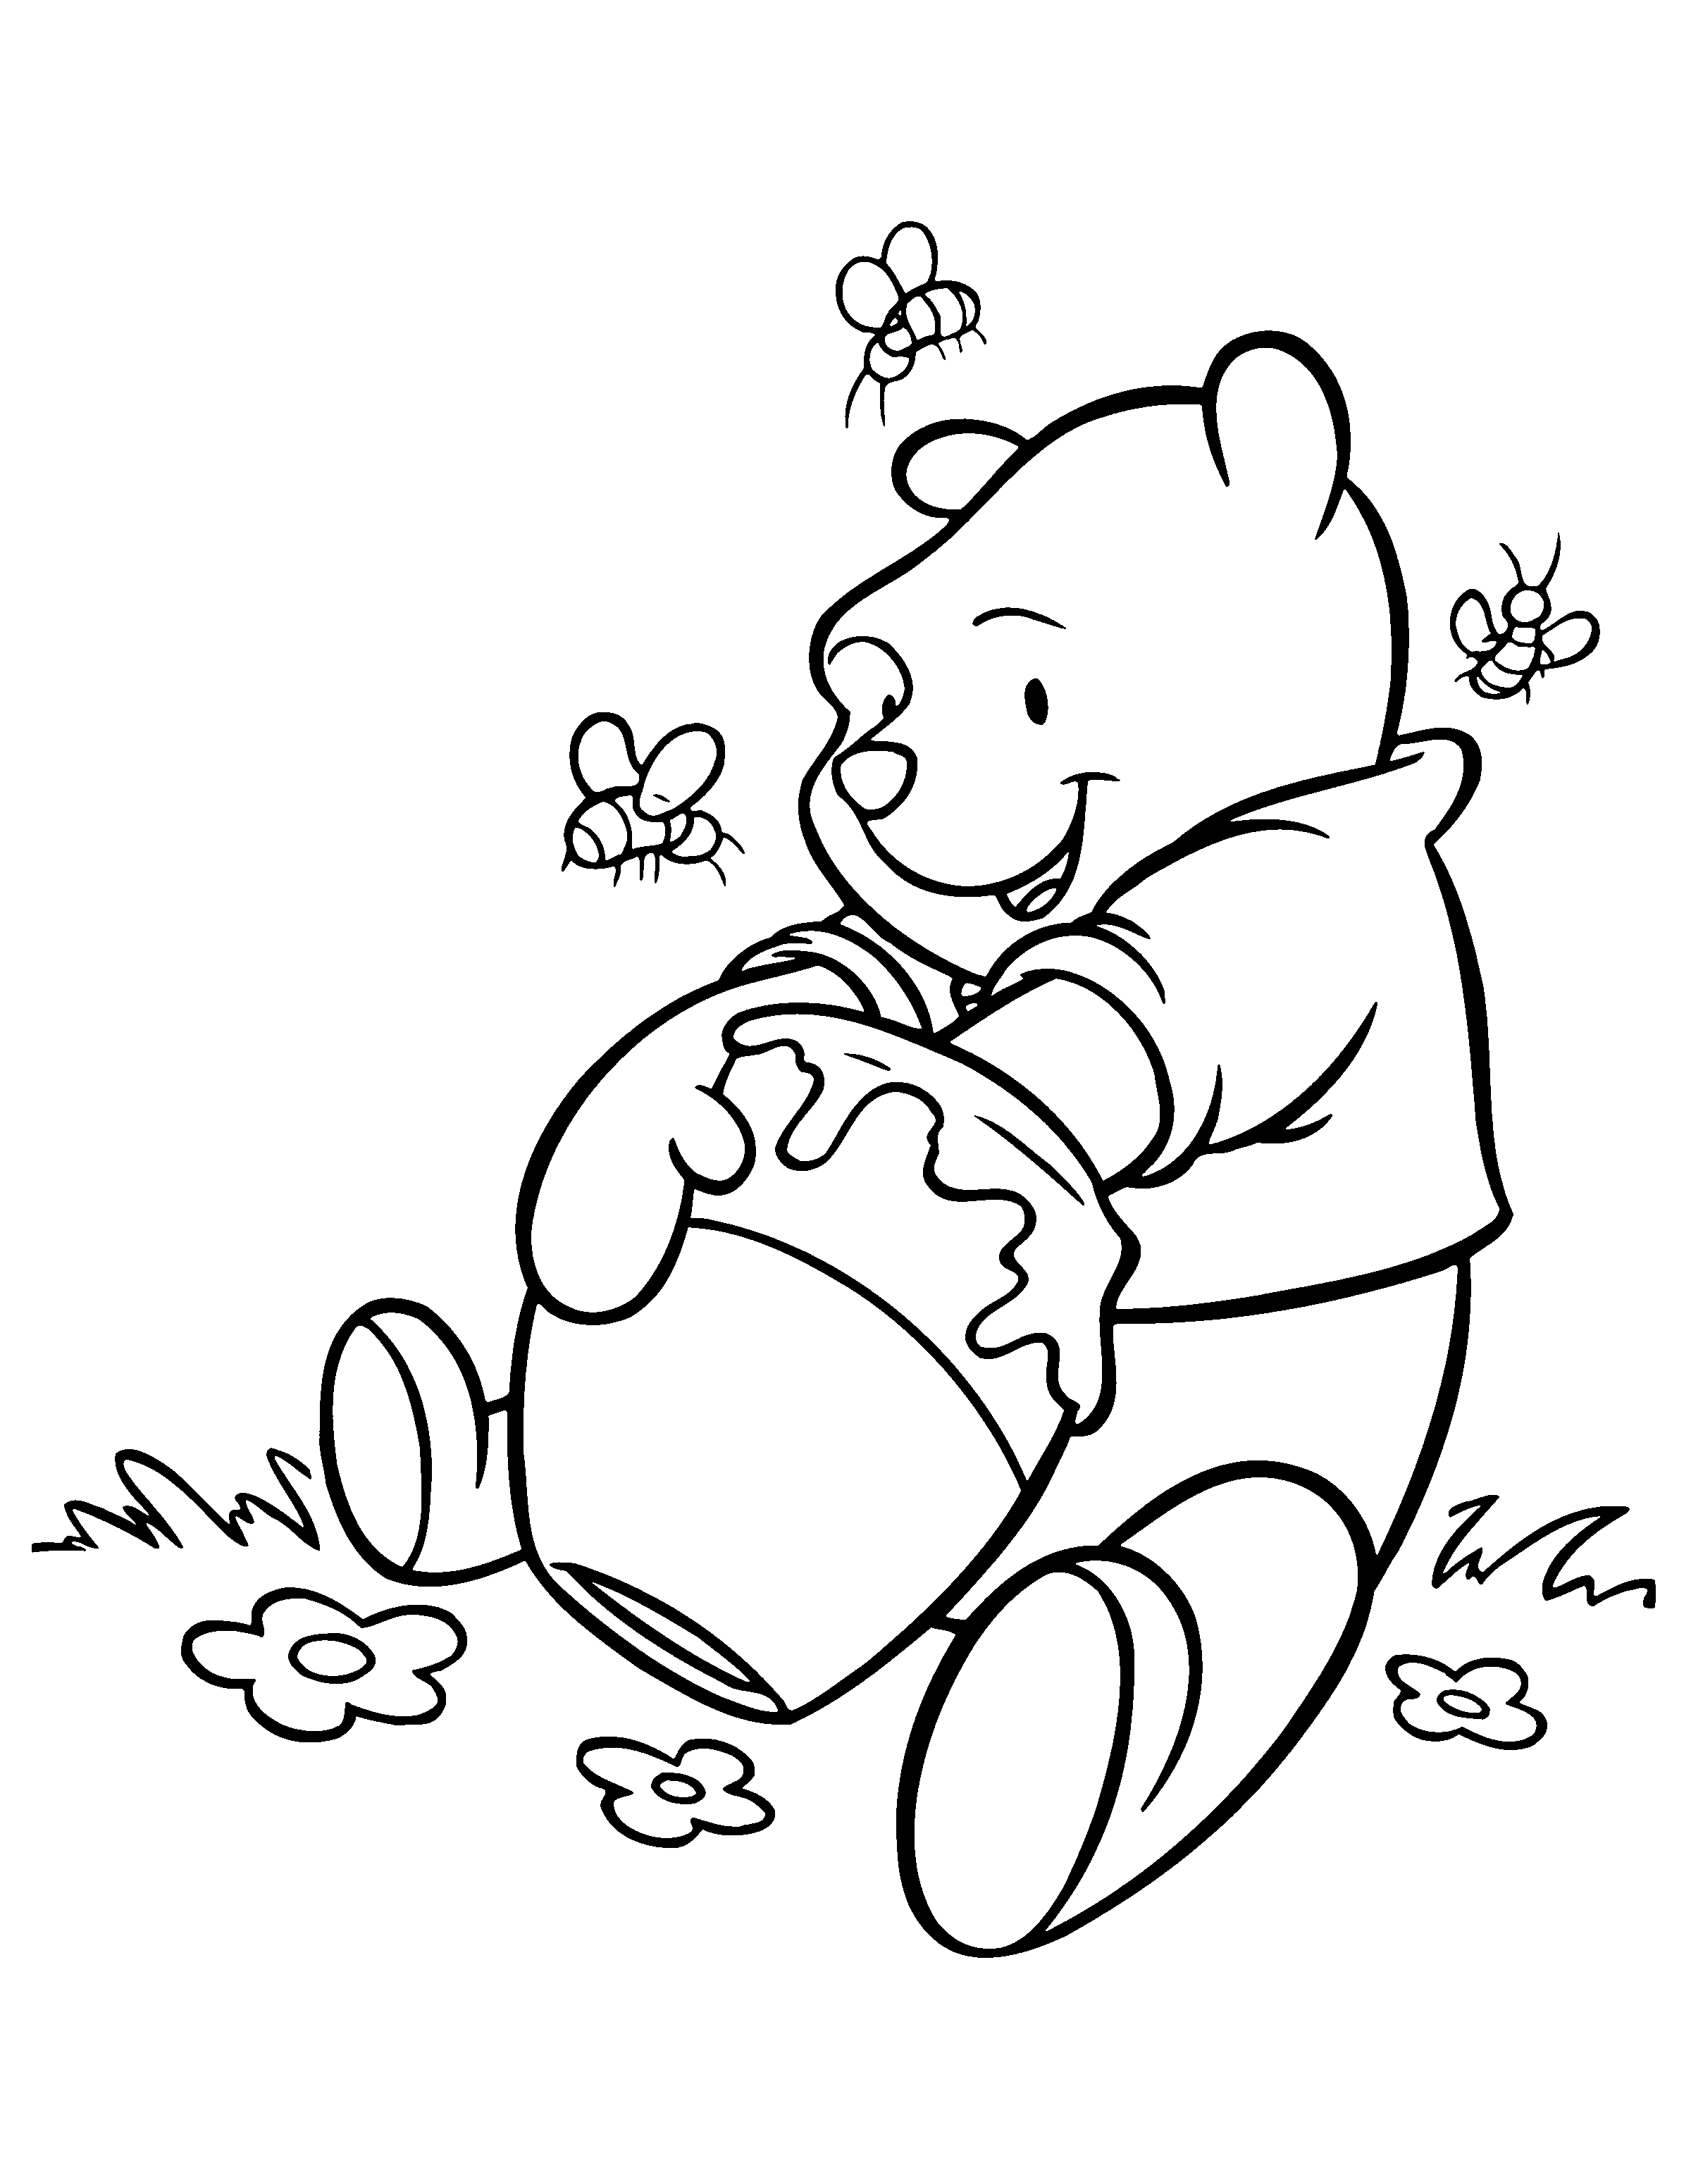 Free Printable Winnie The Pooh Coloring Pages For Kids   Coloring Home